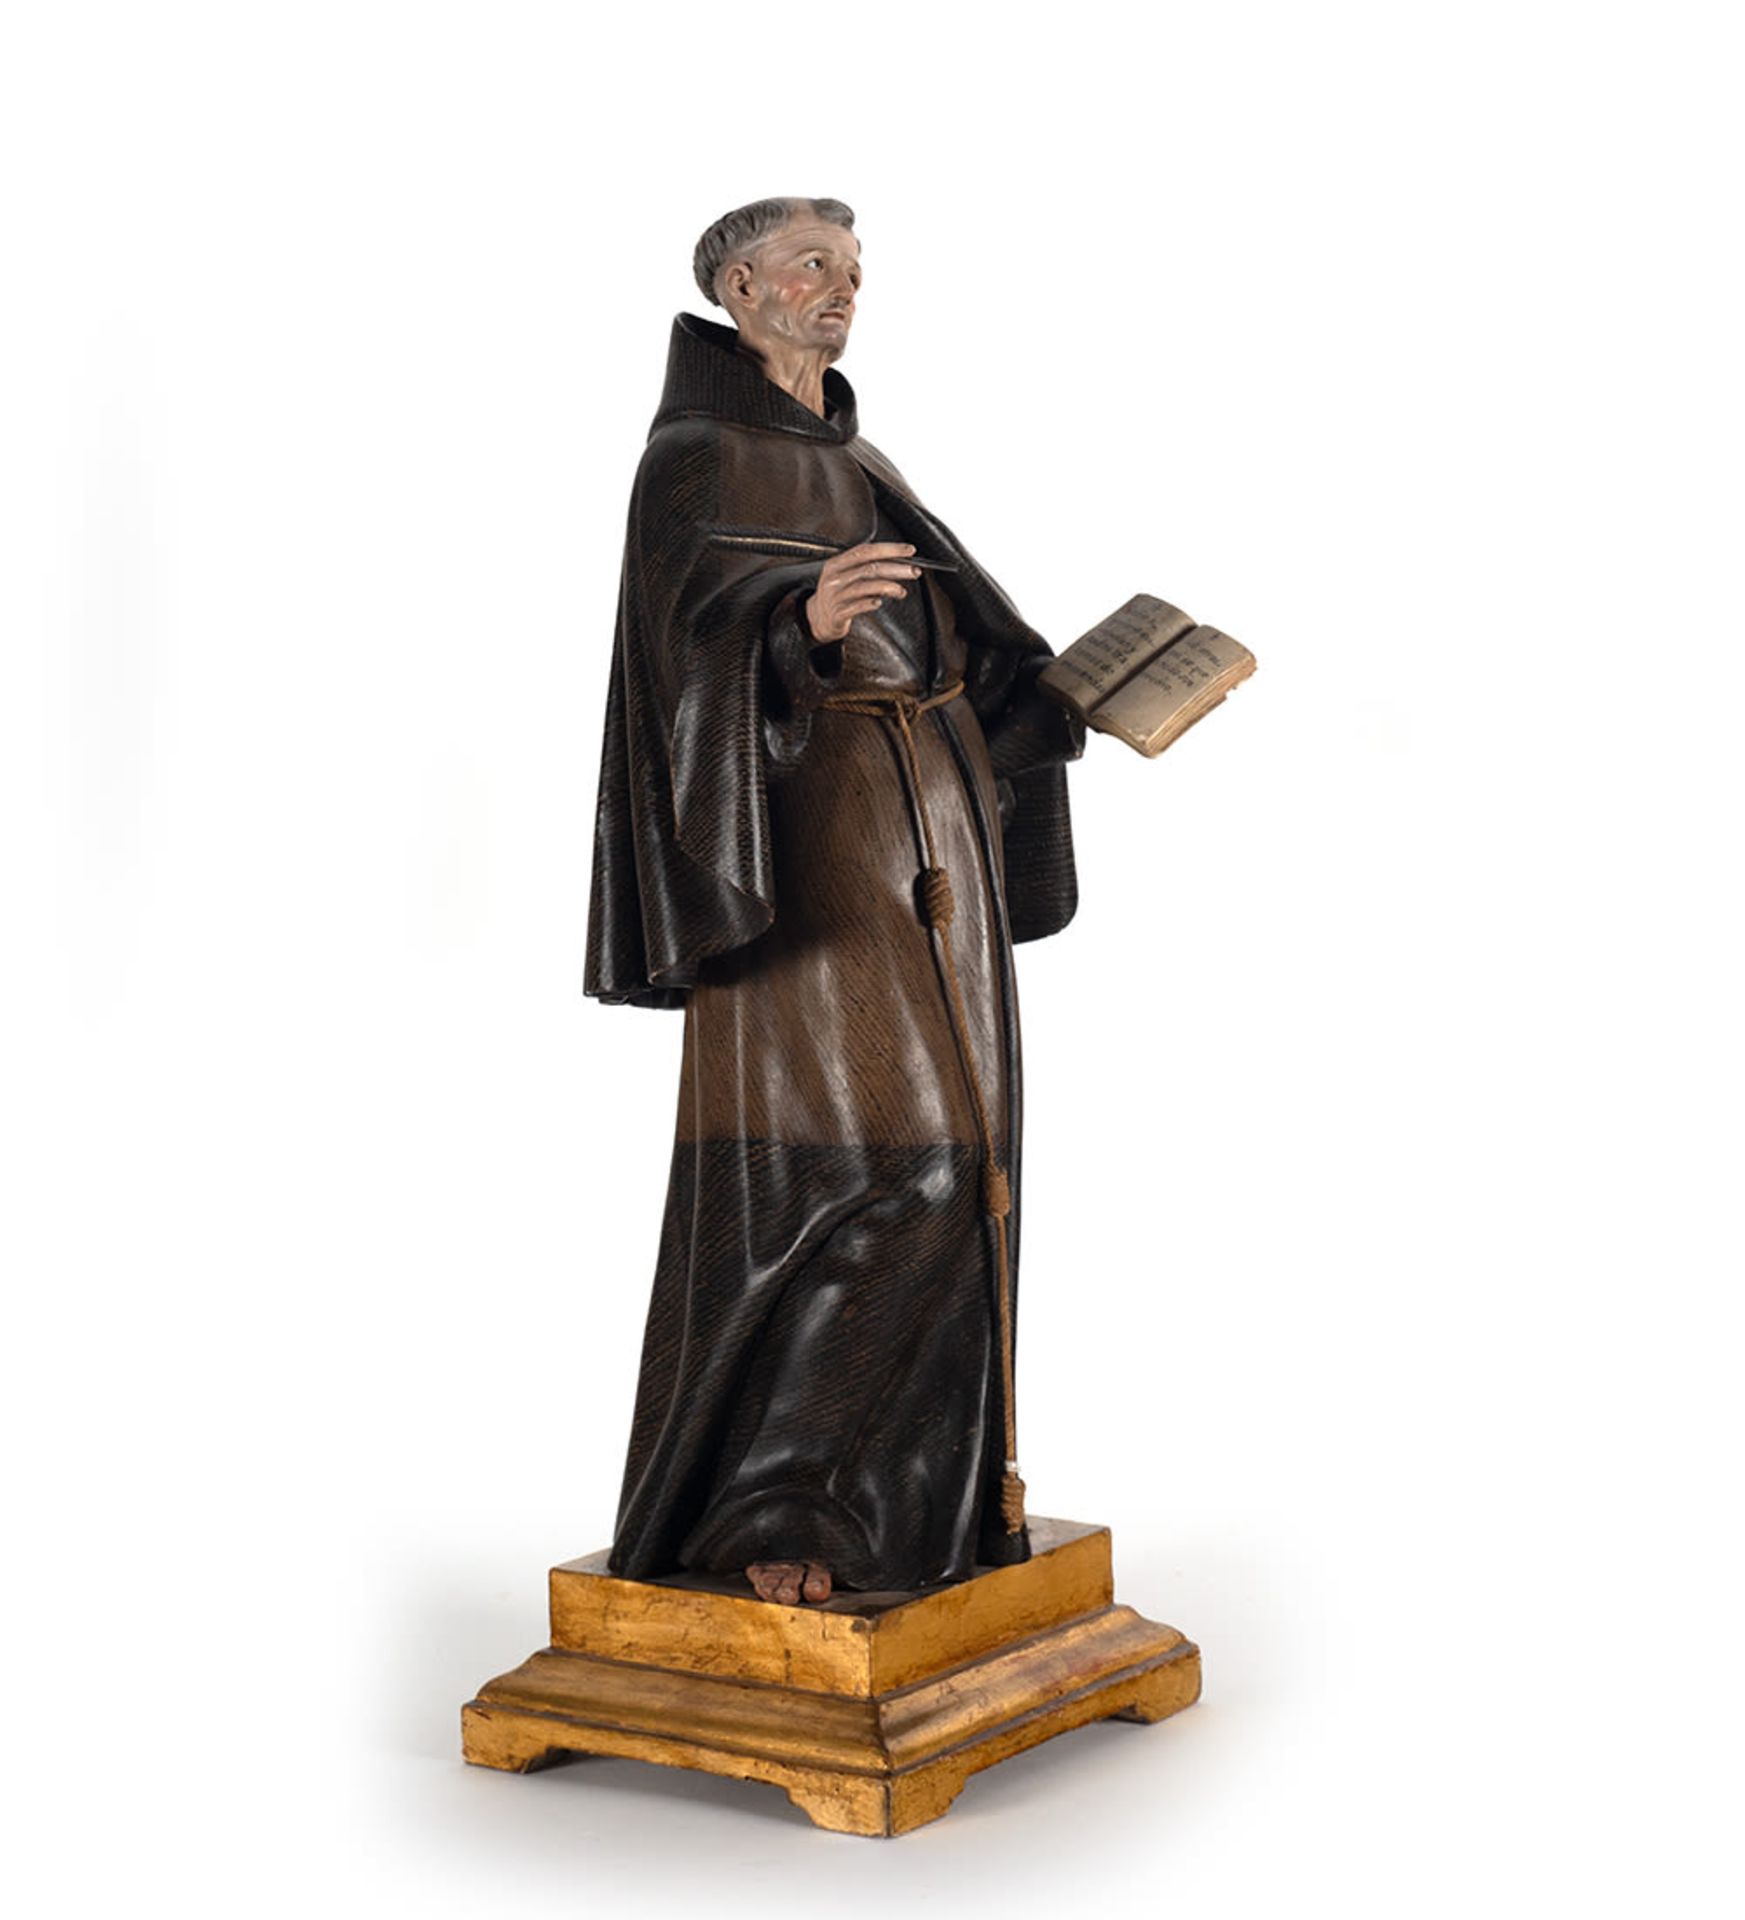 San Francis of Assisi , Granada school from the 17th century, attributed to José de Mora - Image 2 of 5